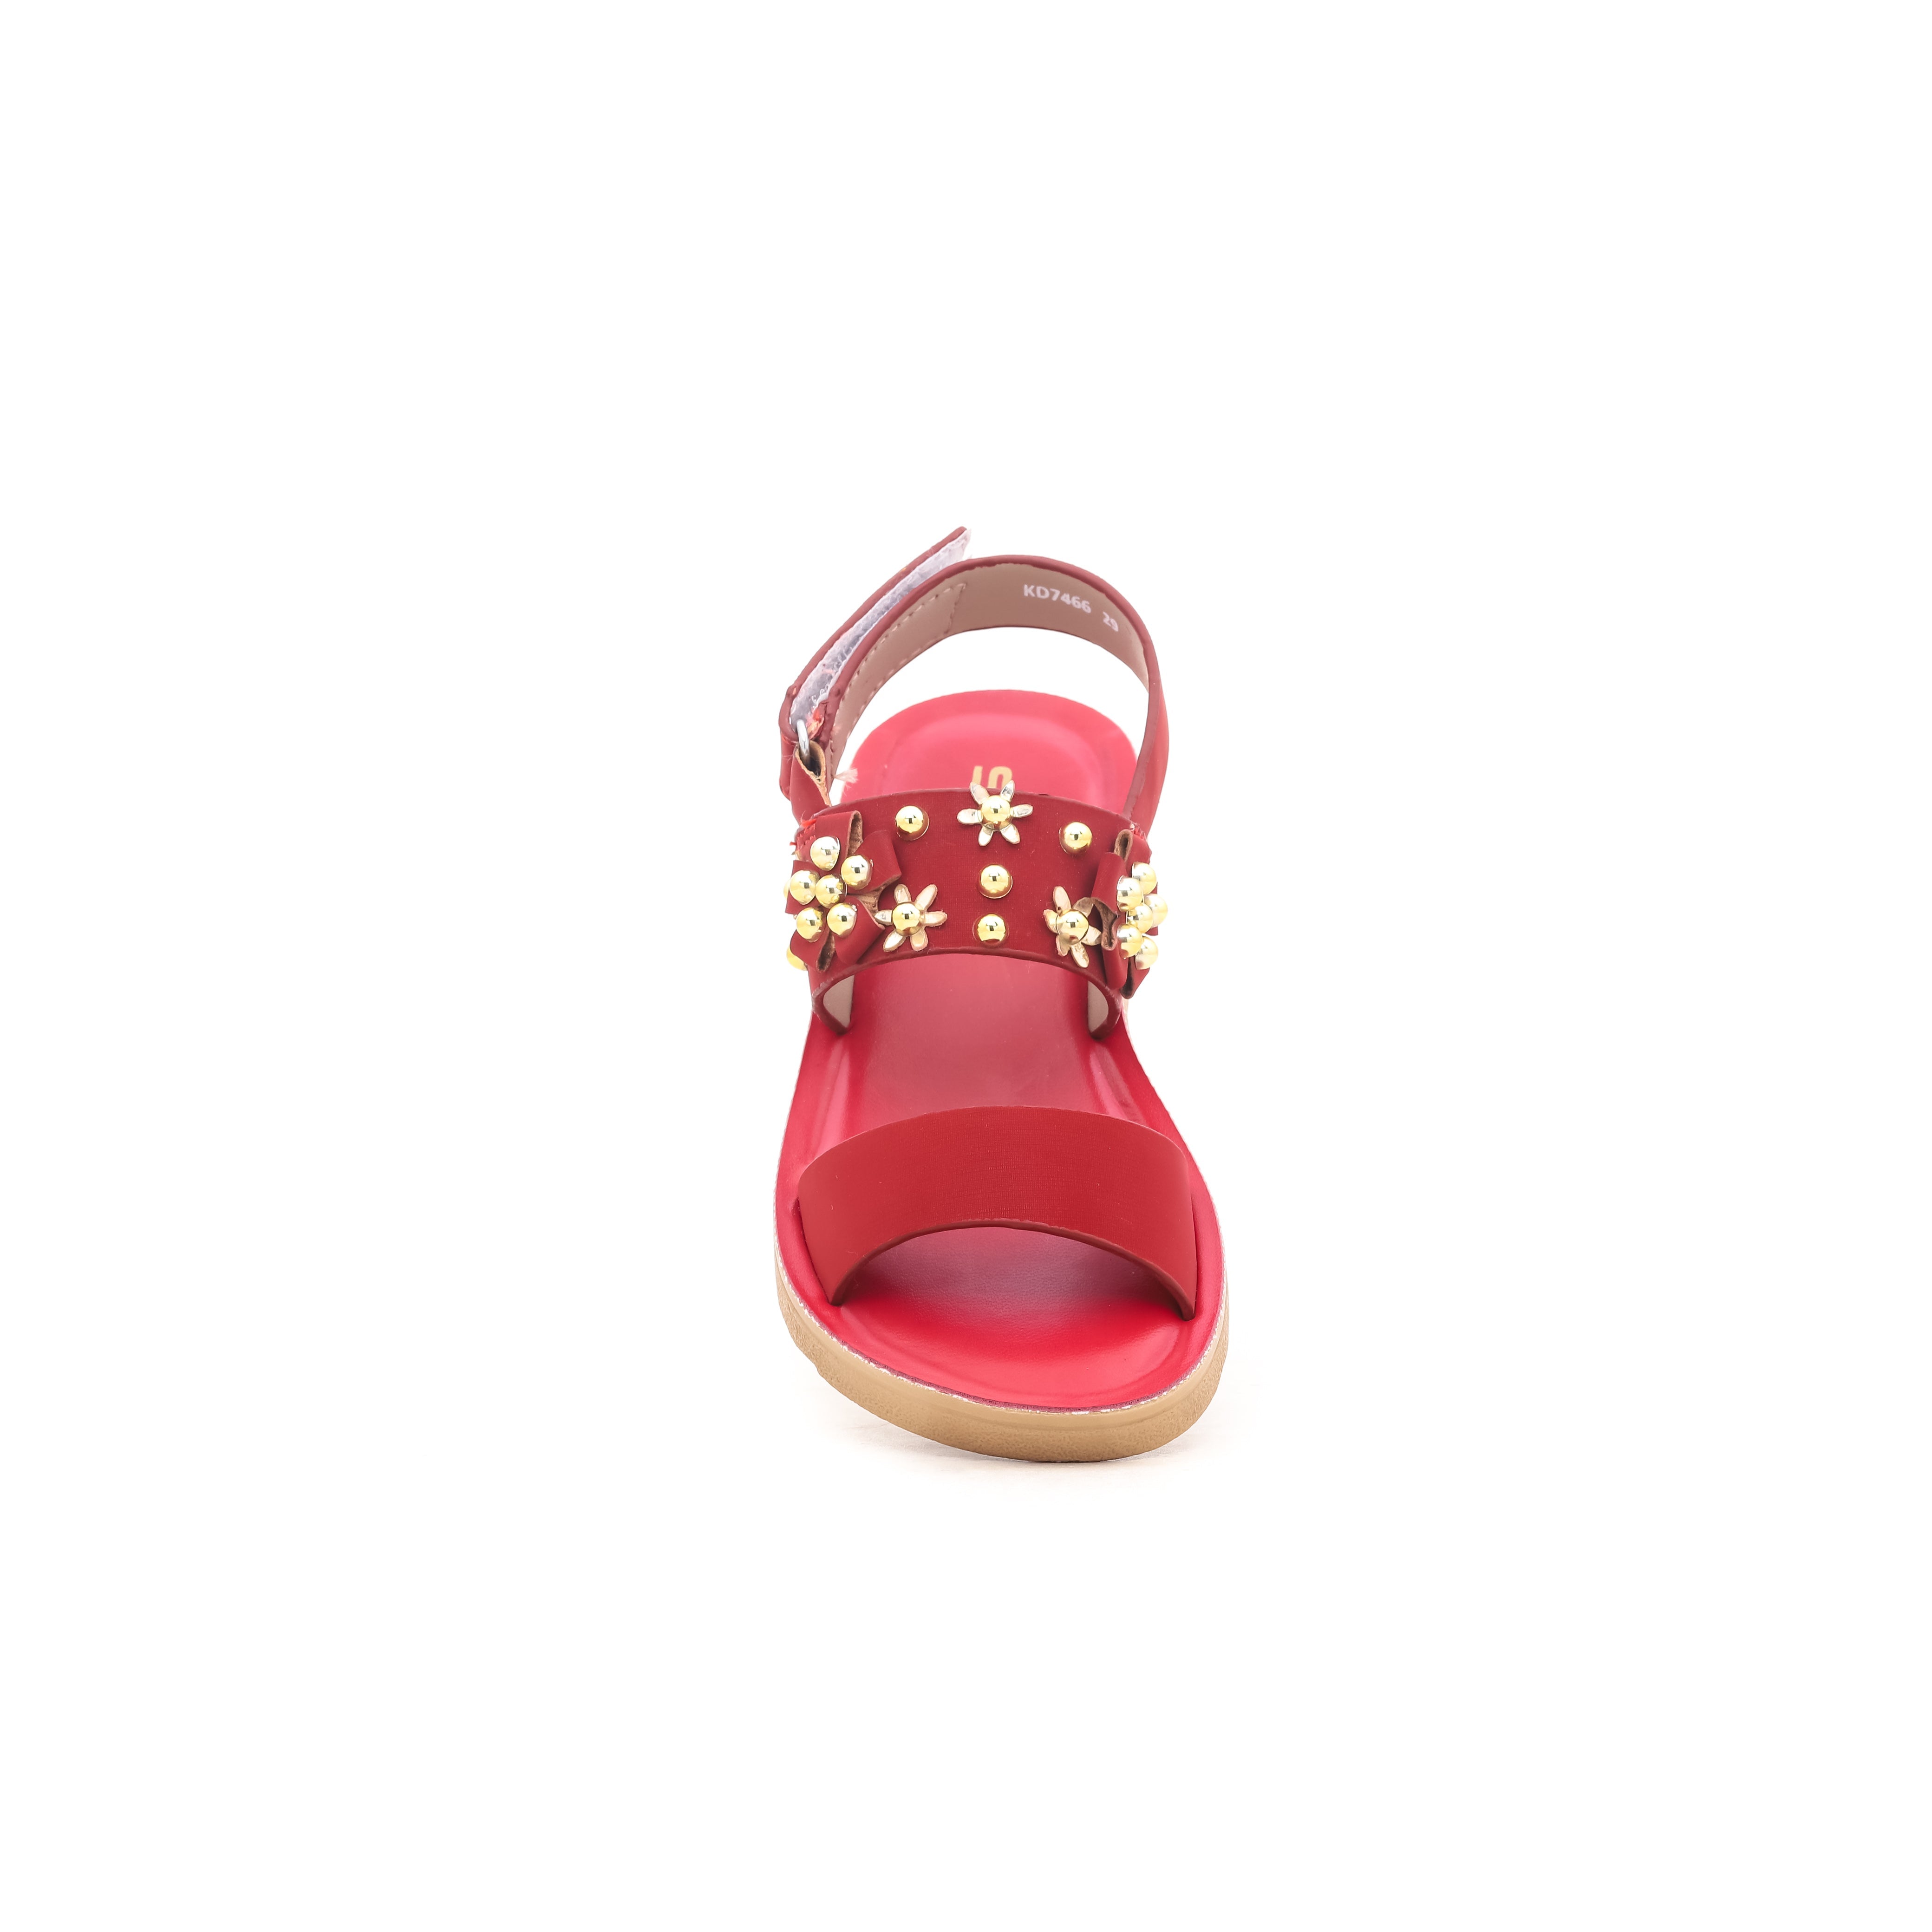 Girls Red Casual Sandal KD7466